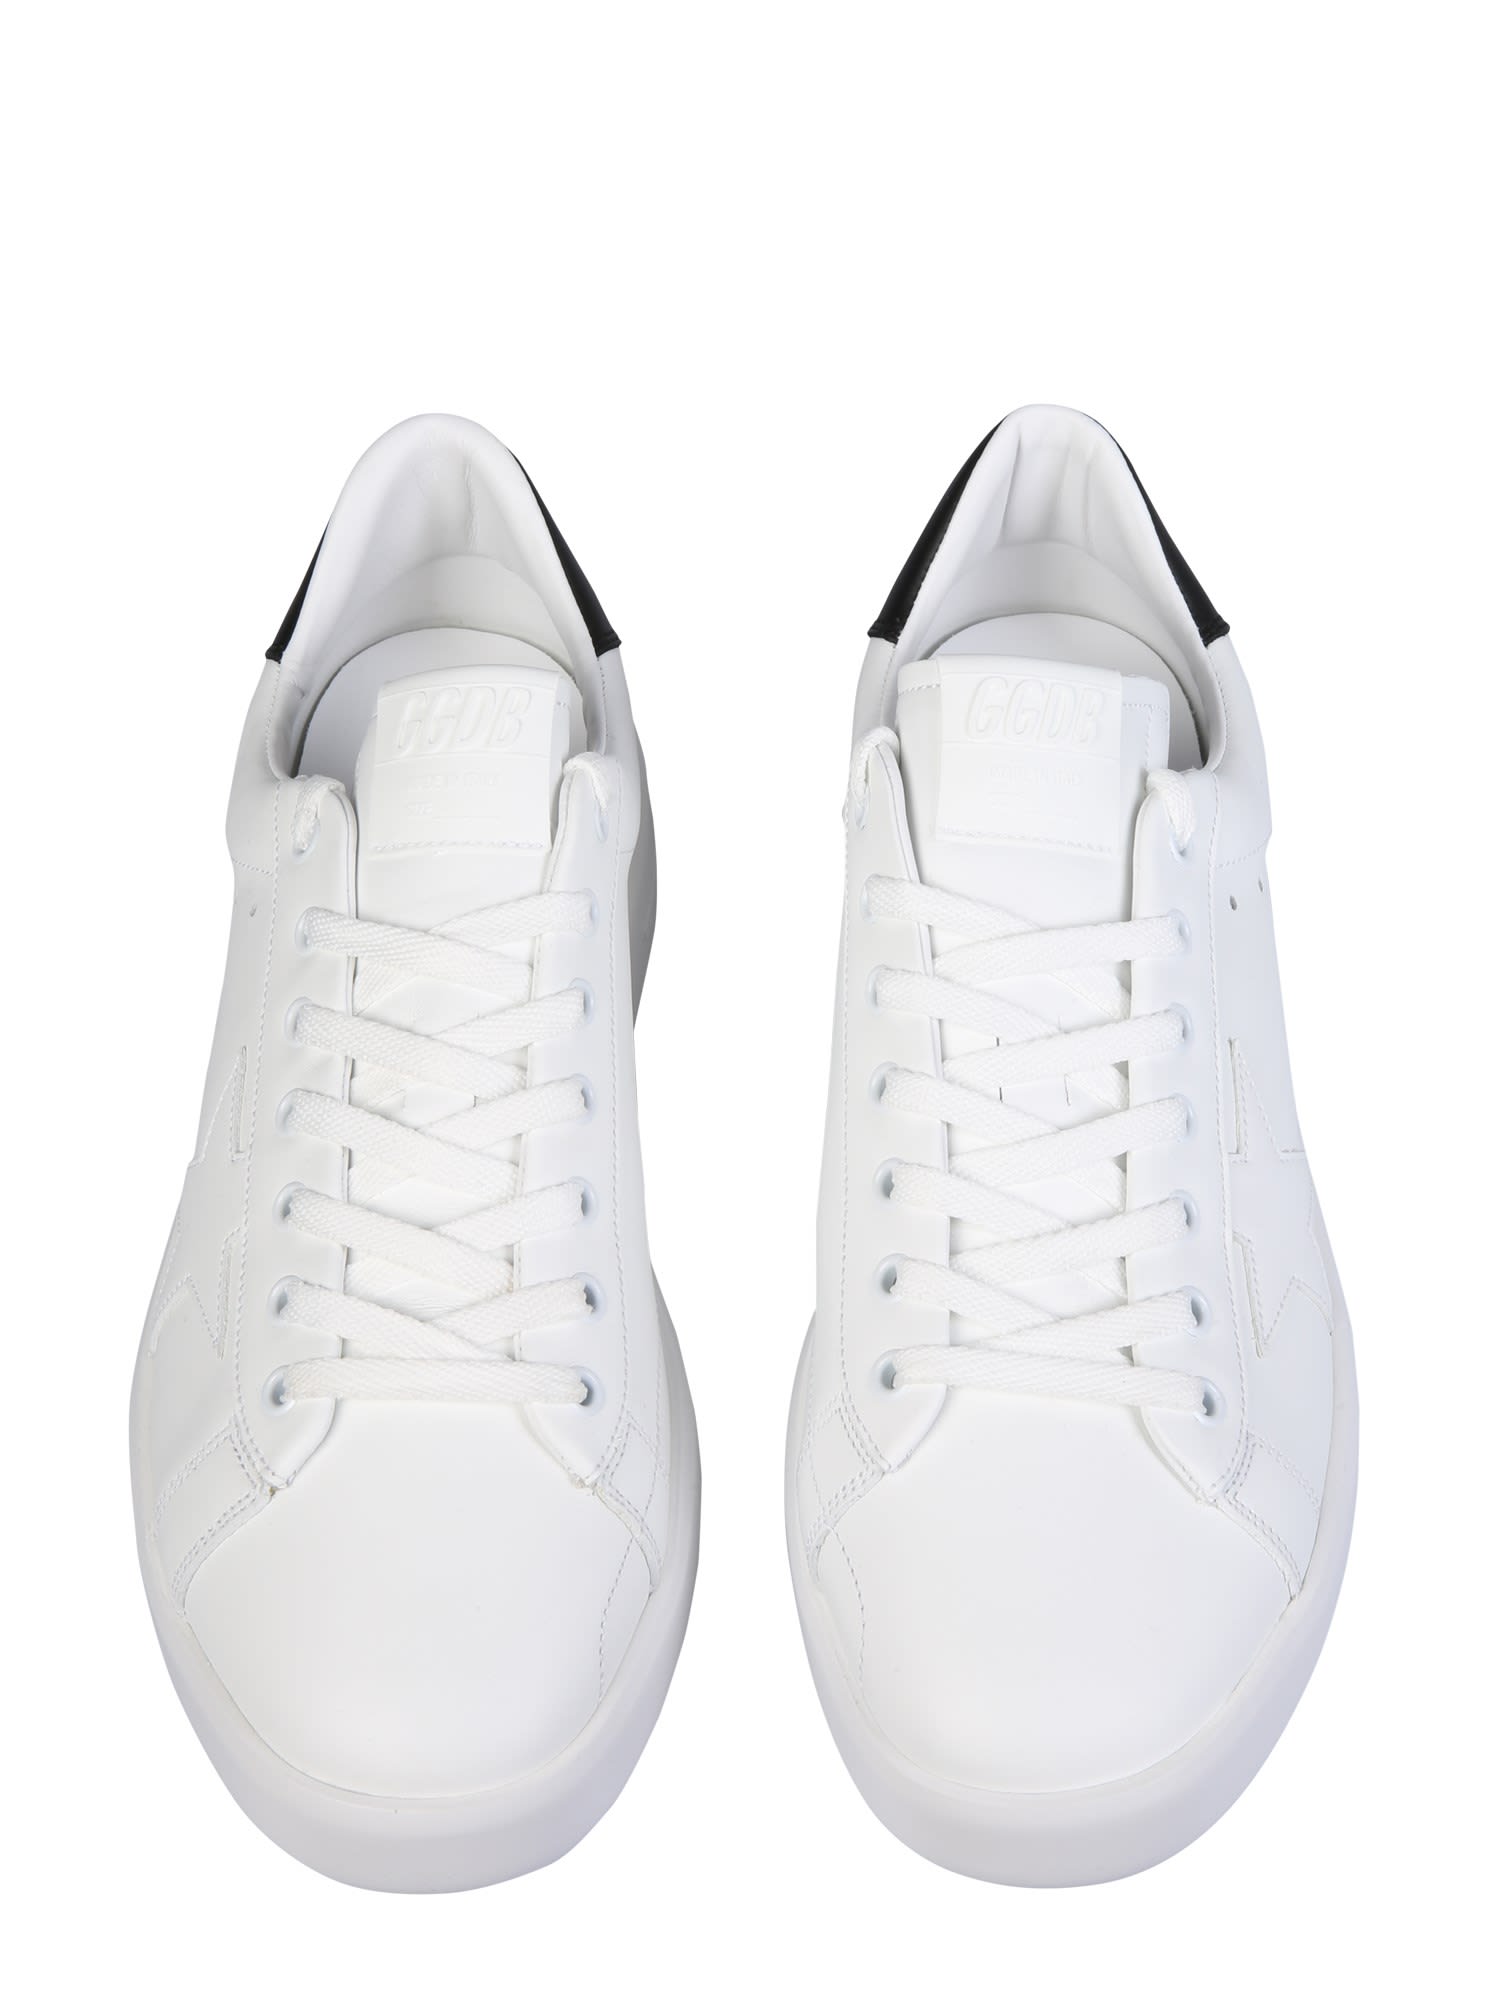 Shop Golden Goose Pure New Sneakers In Bianco